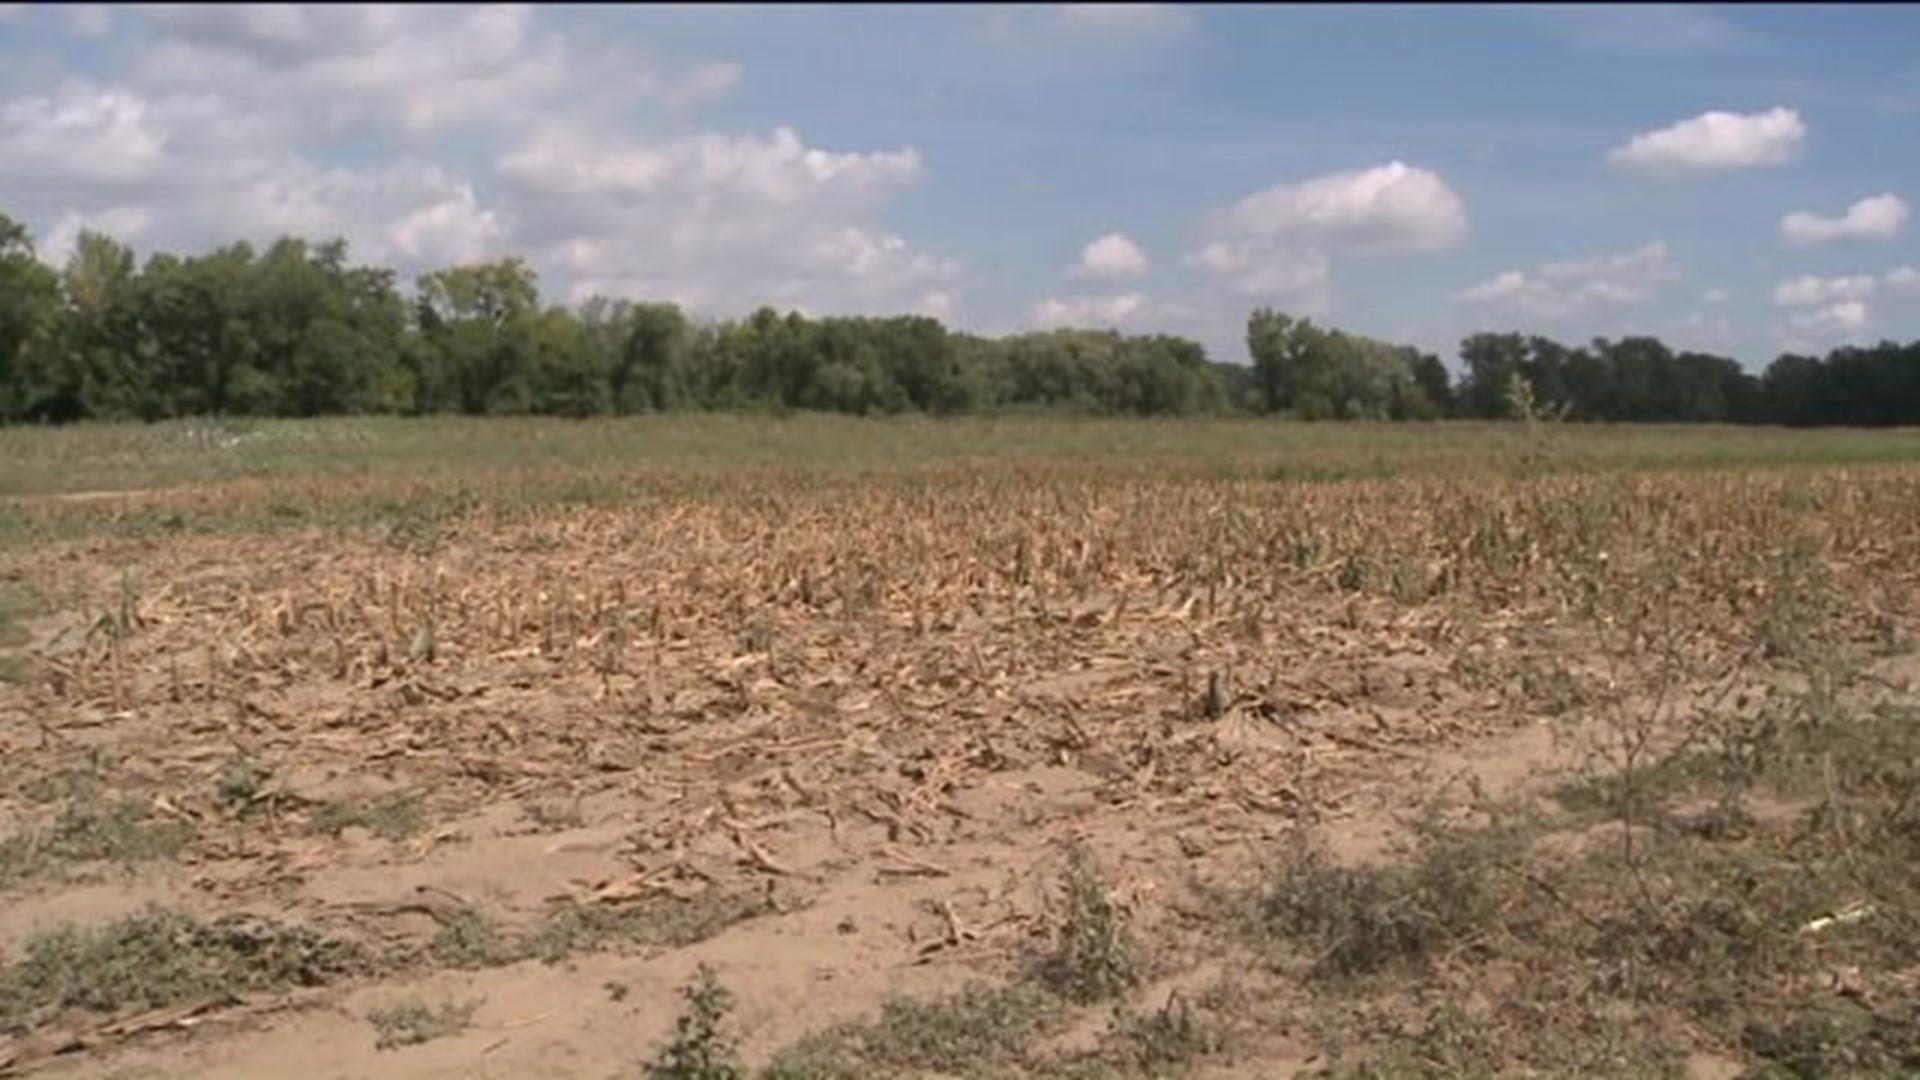 Severe draught causing concern for farmers